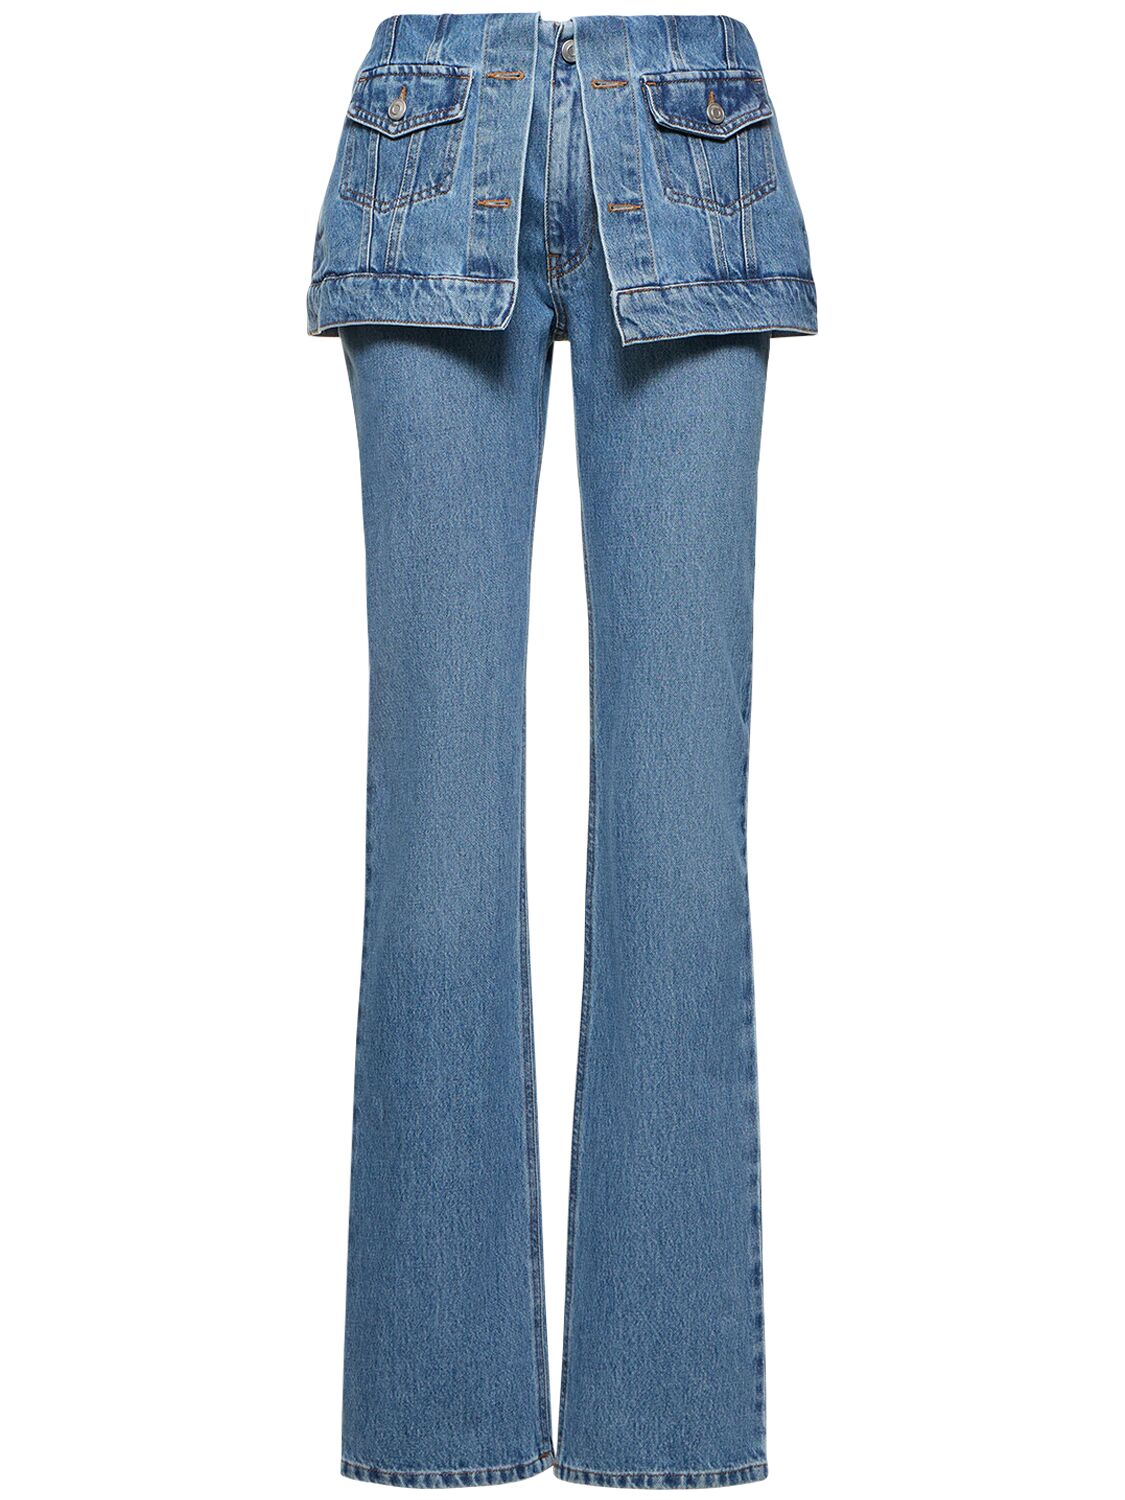 Image of Straight Denim Jeans W/ Front Flaps